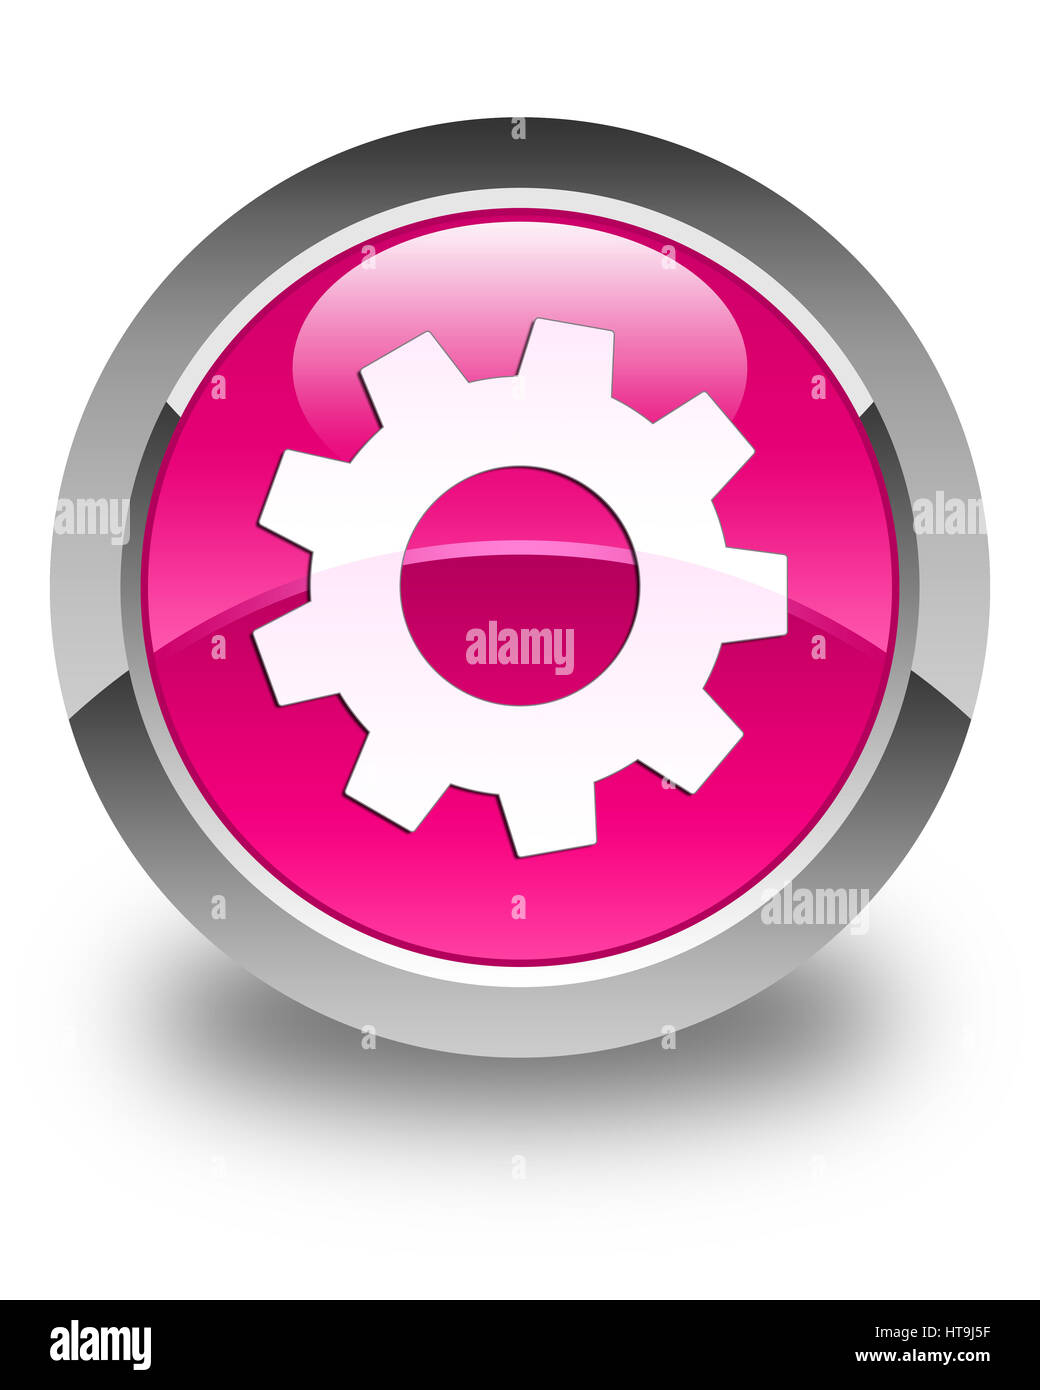 Process icon isolated on glossy pink round button abstract illustration Stock Photo